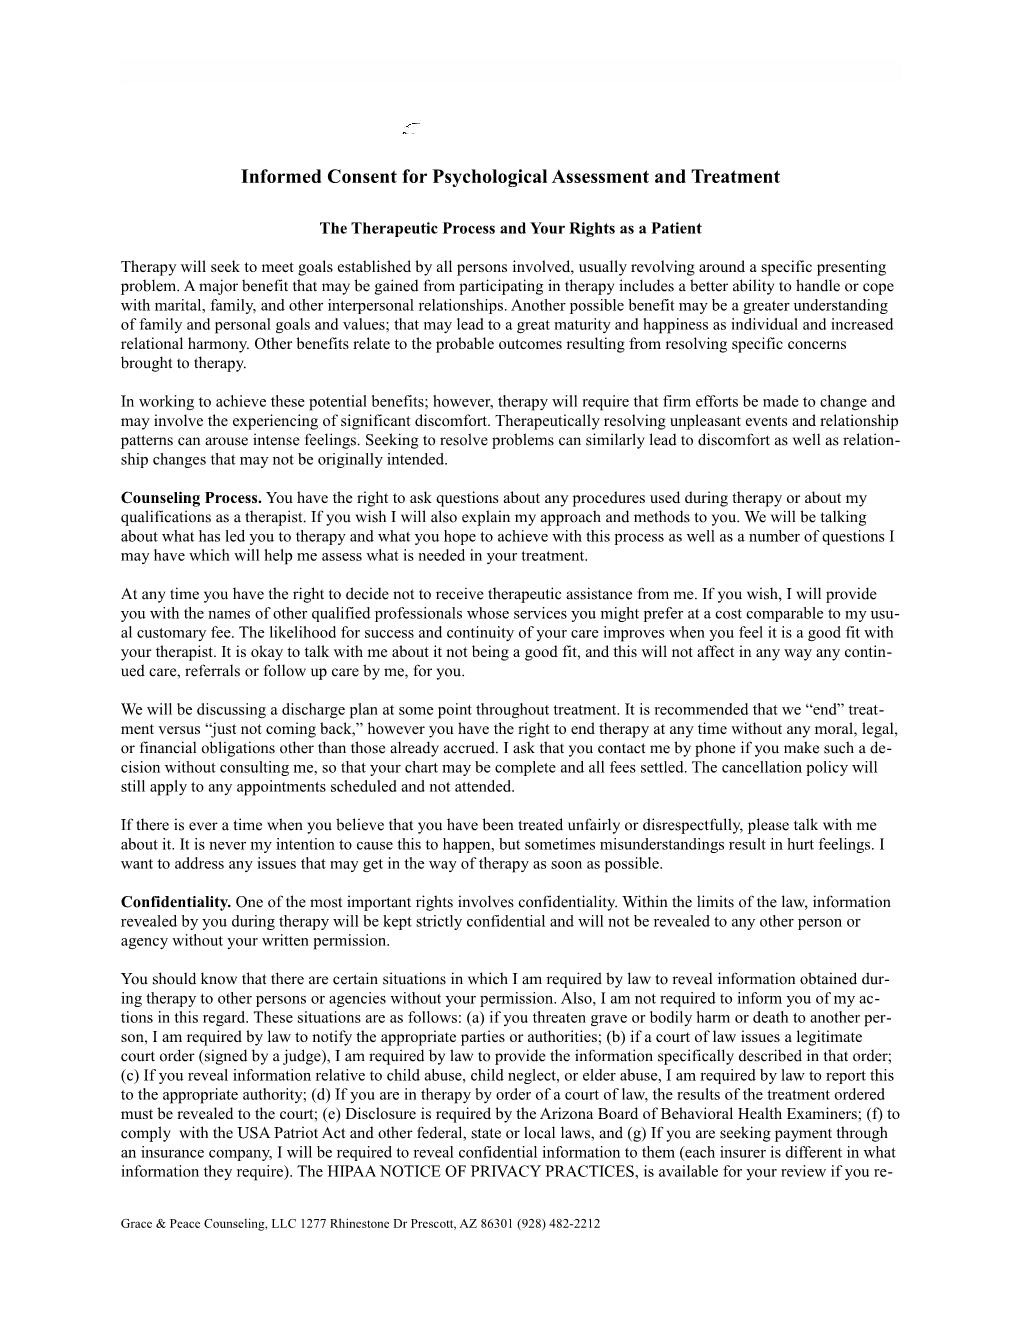 Informed Consent for Psychological Assessment and Treatment